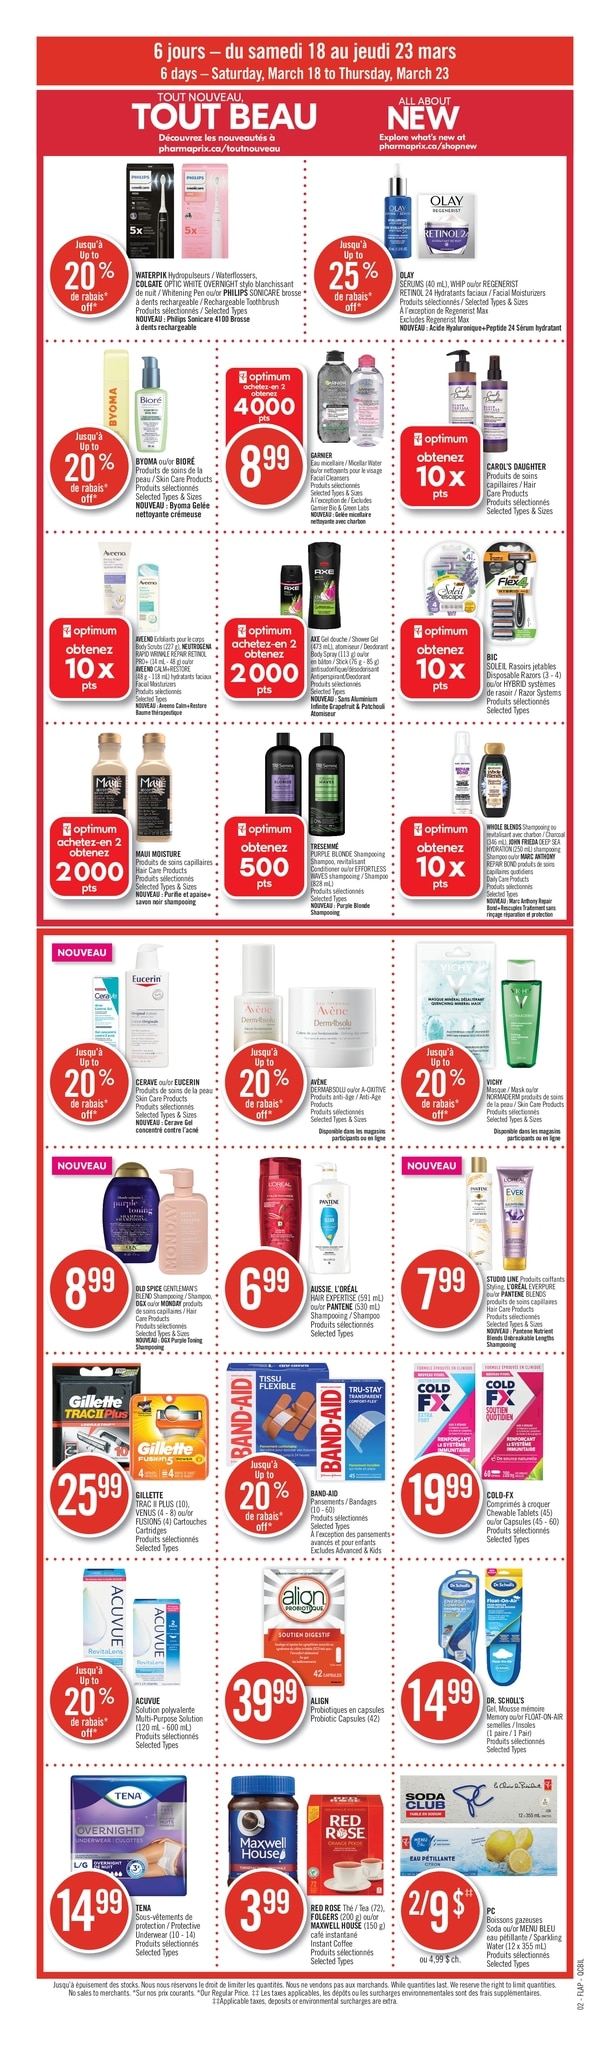 Pharmaprix - Weekly Flyer Specials - Page 4